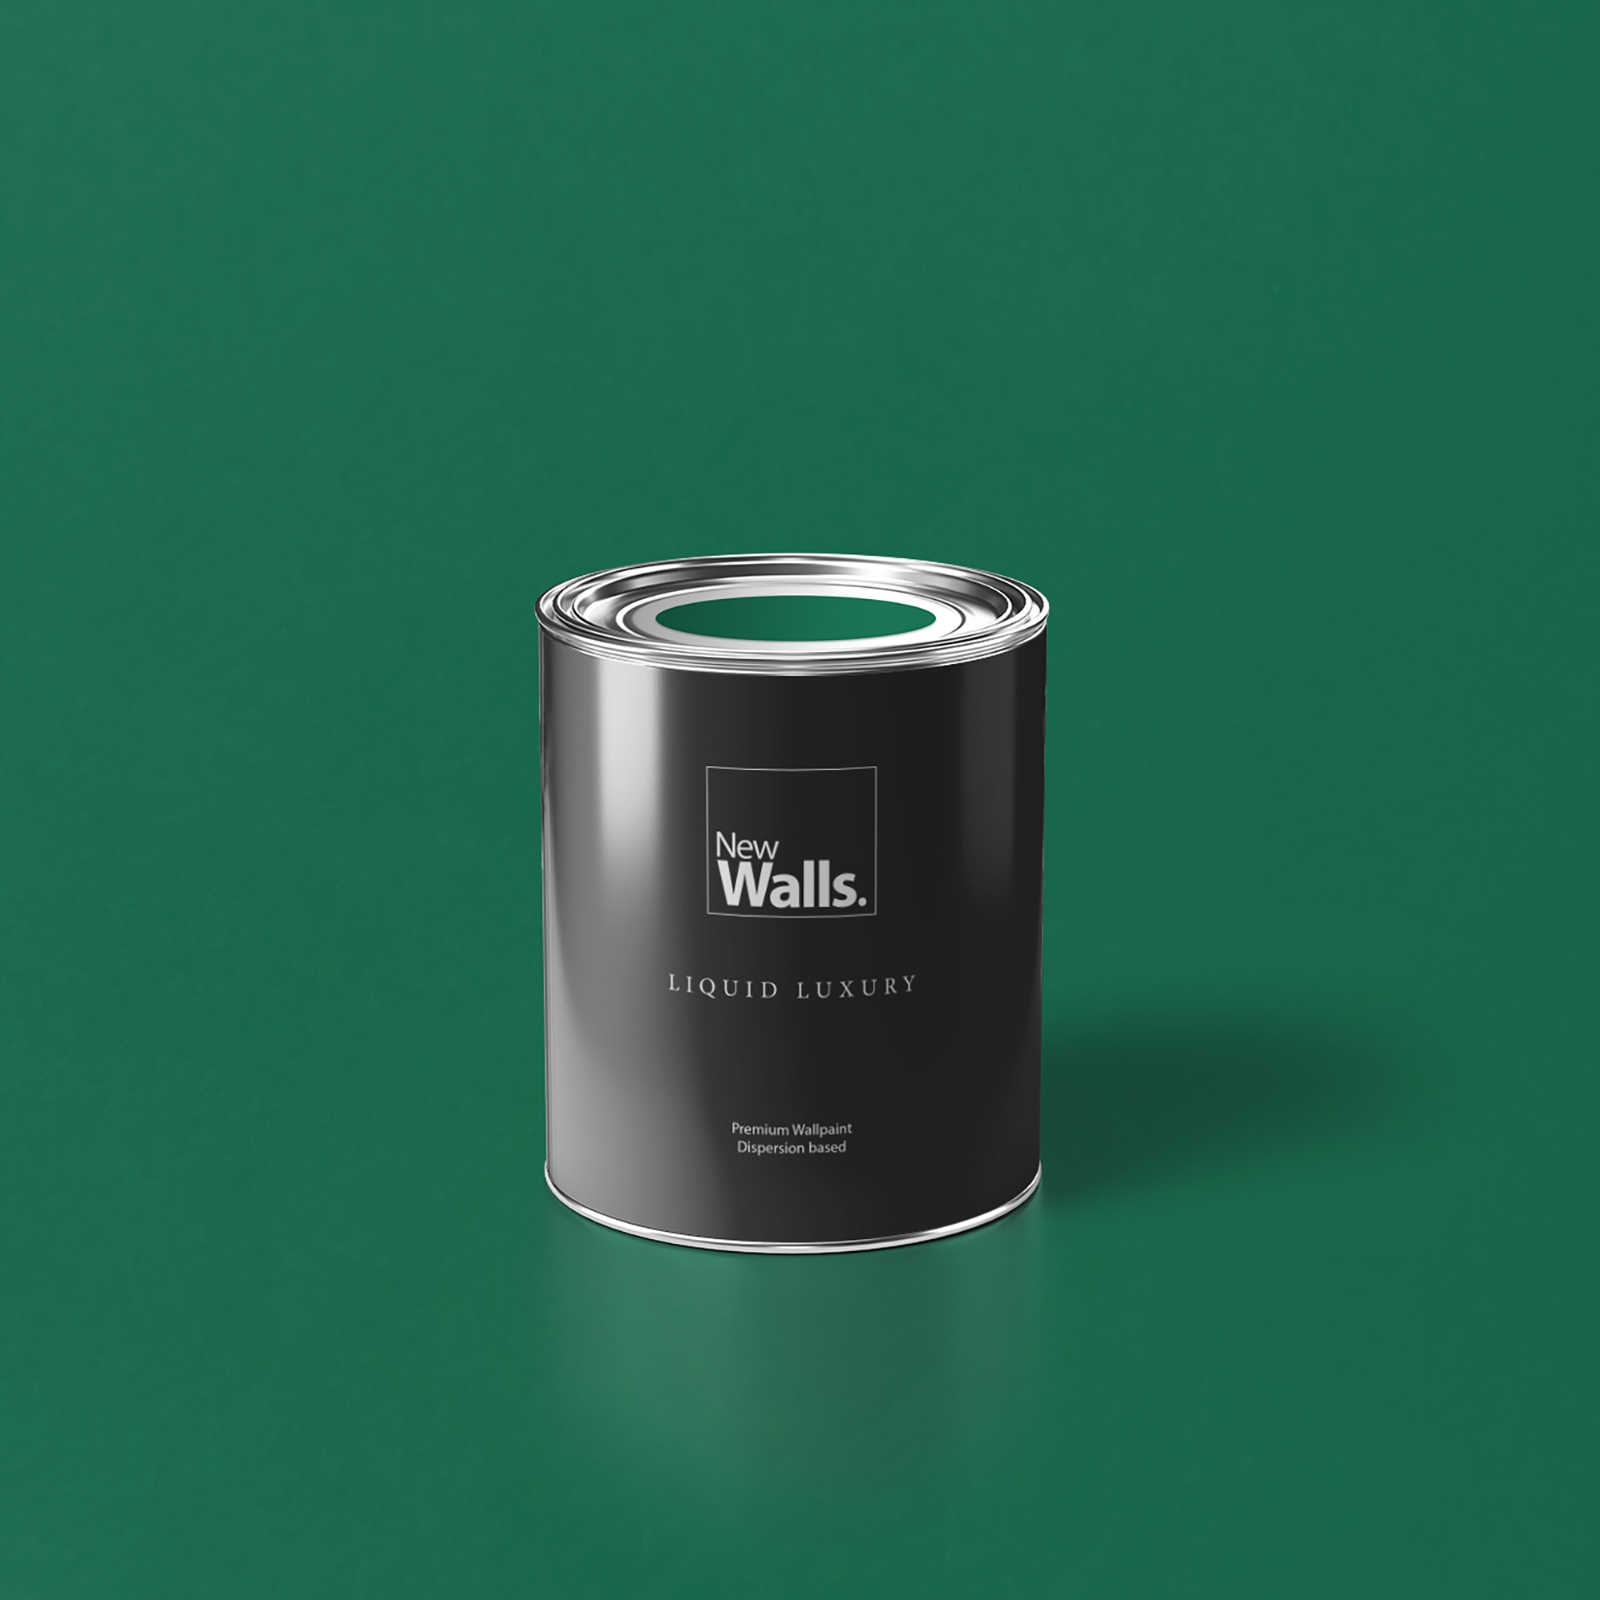         Premium Wall Paint Nature Bottle Green »Gorgeous Green« NW500 – 1 litre
    